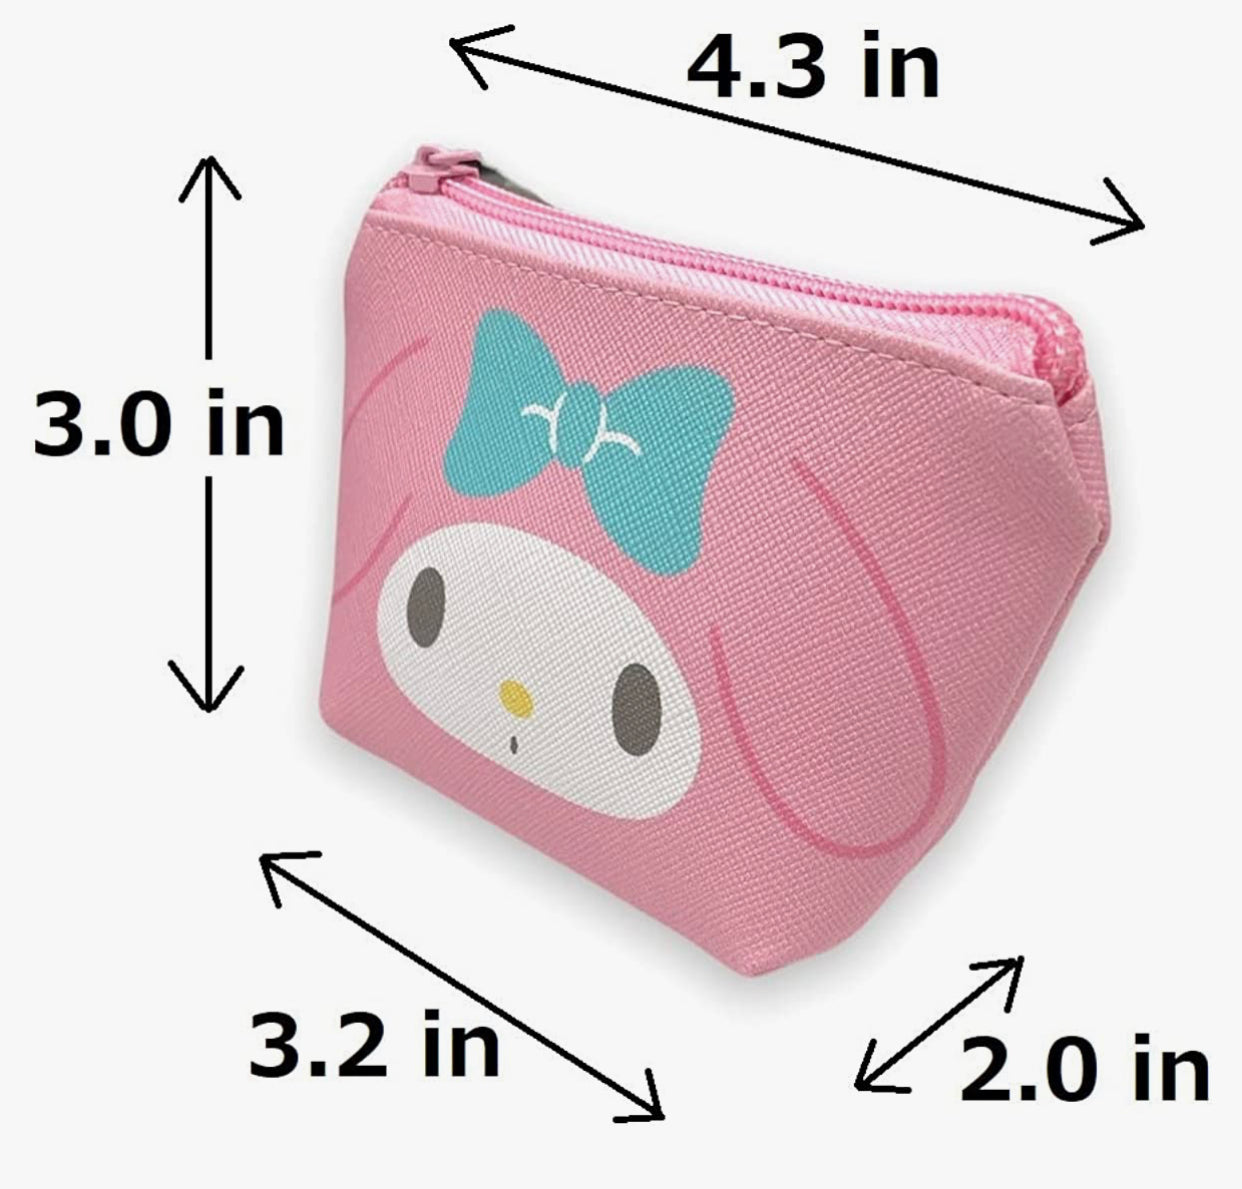 My Melody Face Mini Pouch Bag